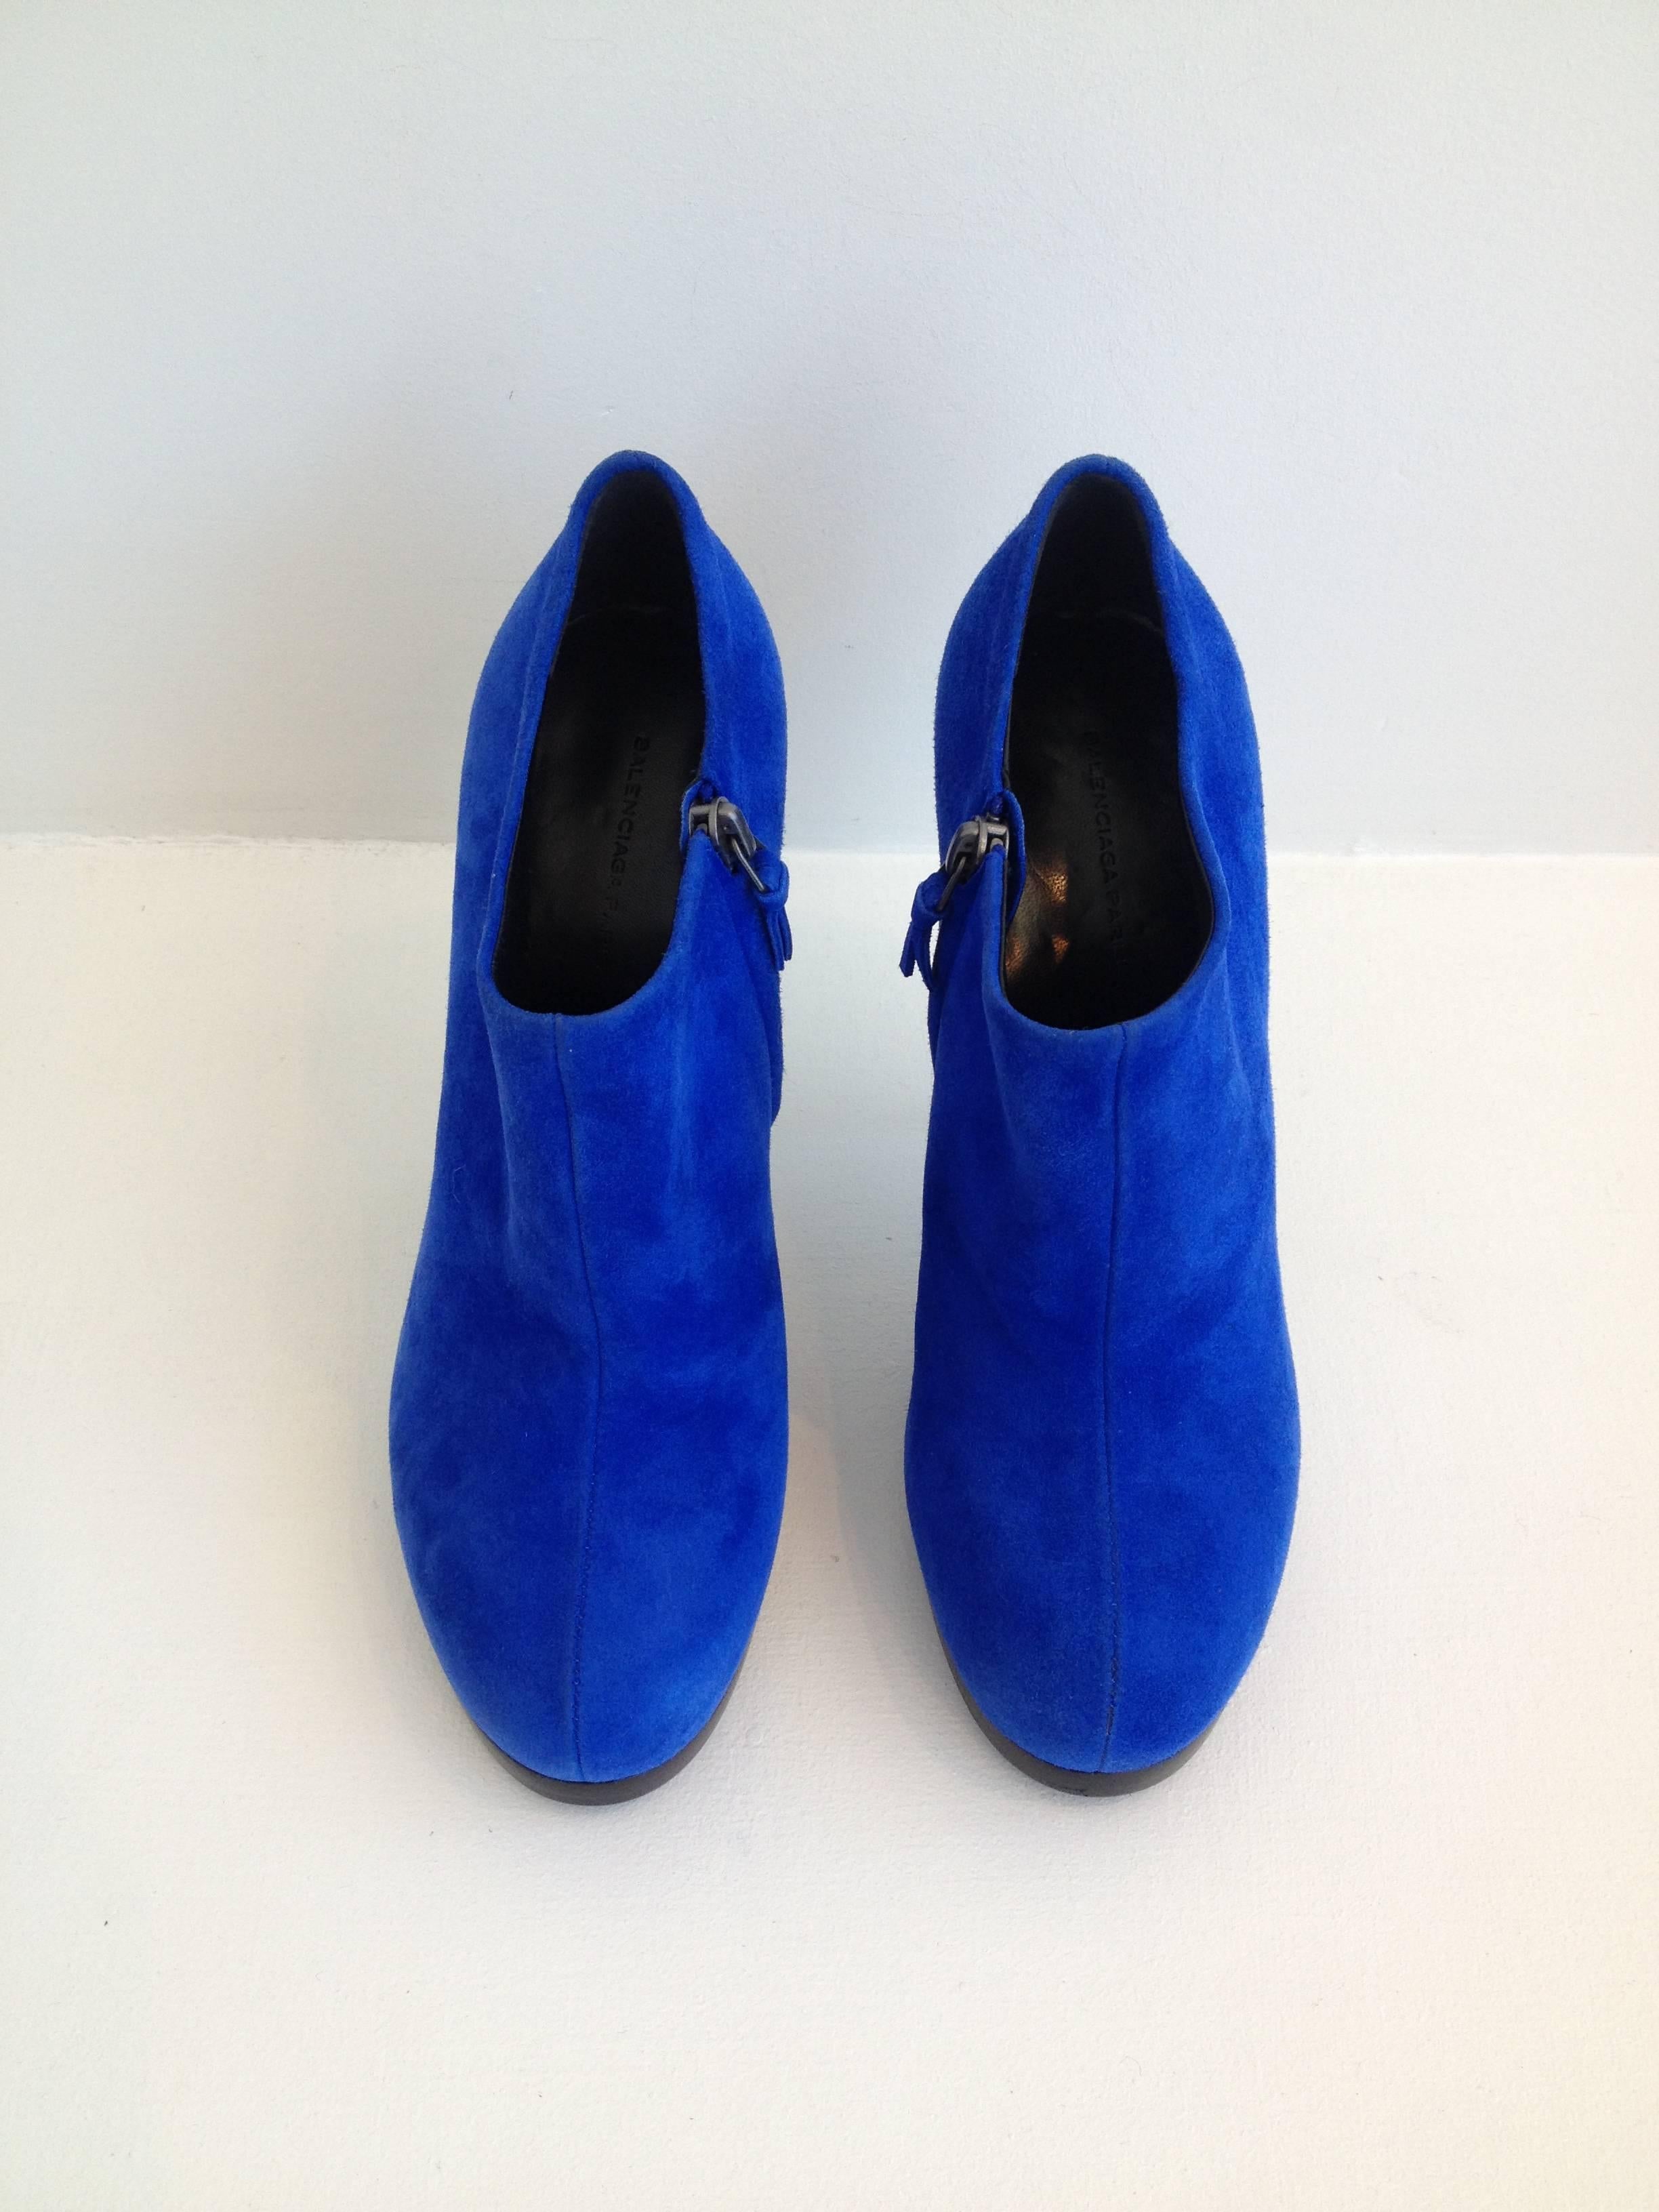 Bright and vibrant color is all you need to leap forward into spring. This pair by Balenciaga is fabulous - the exterior is made from a super saturated royal blue suede, perfect for adding a pop of color to any look. The 4.5 inch heel is covered